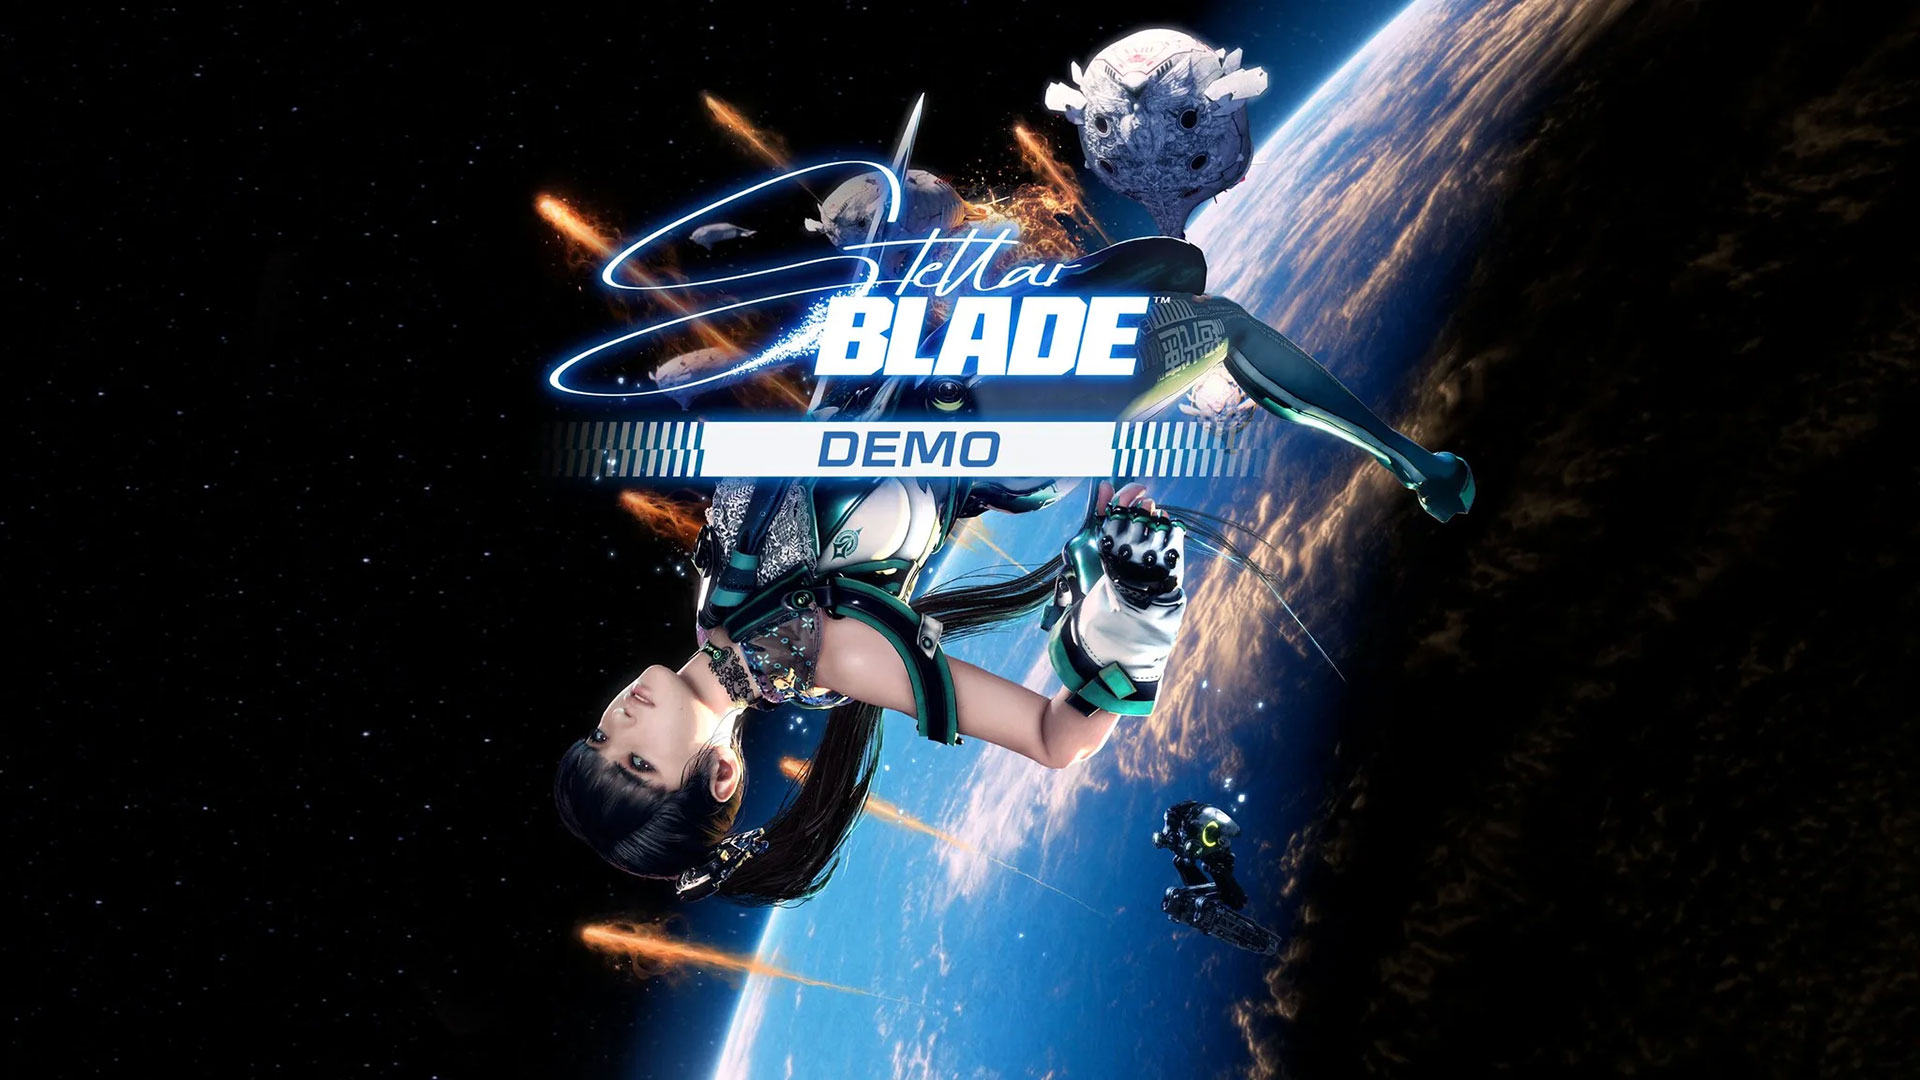 The Stellar Blade demo launches March 29, ahead of the April 26 release date